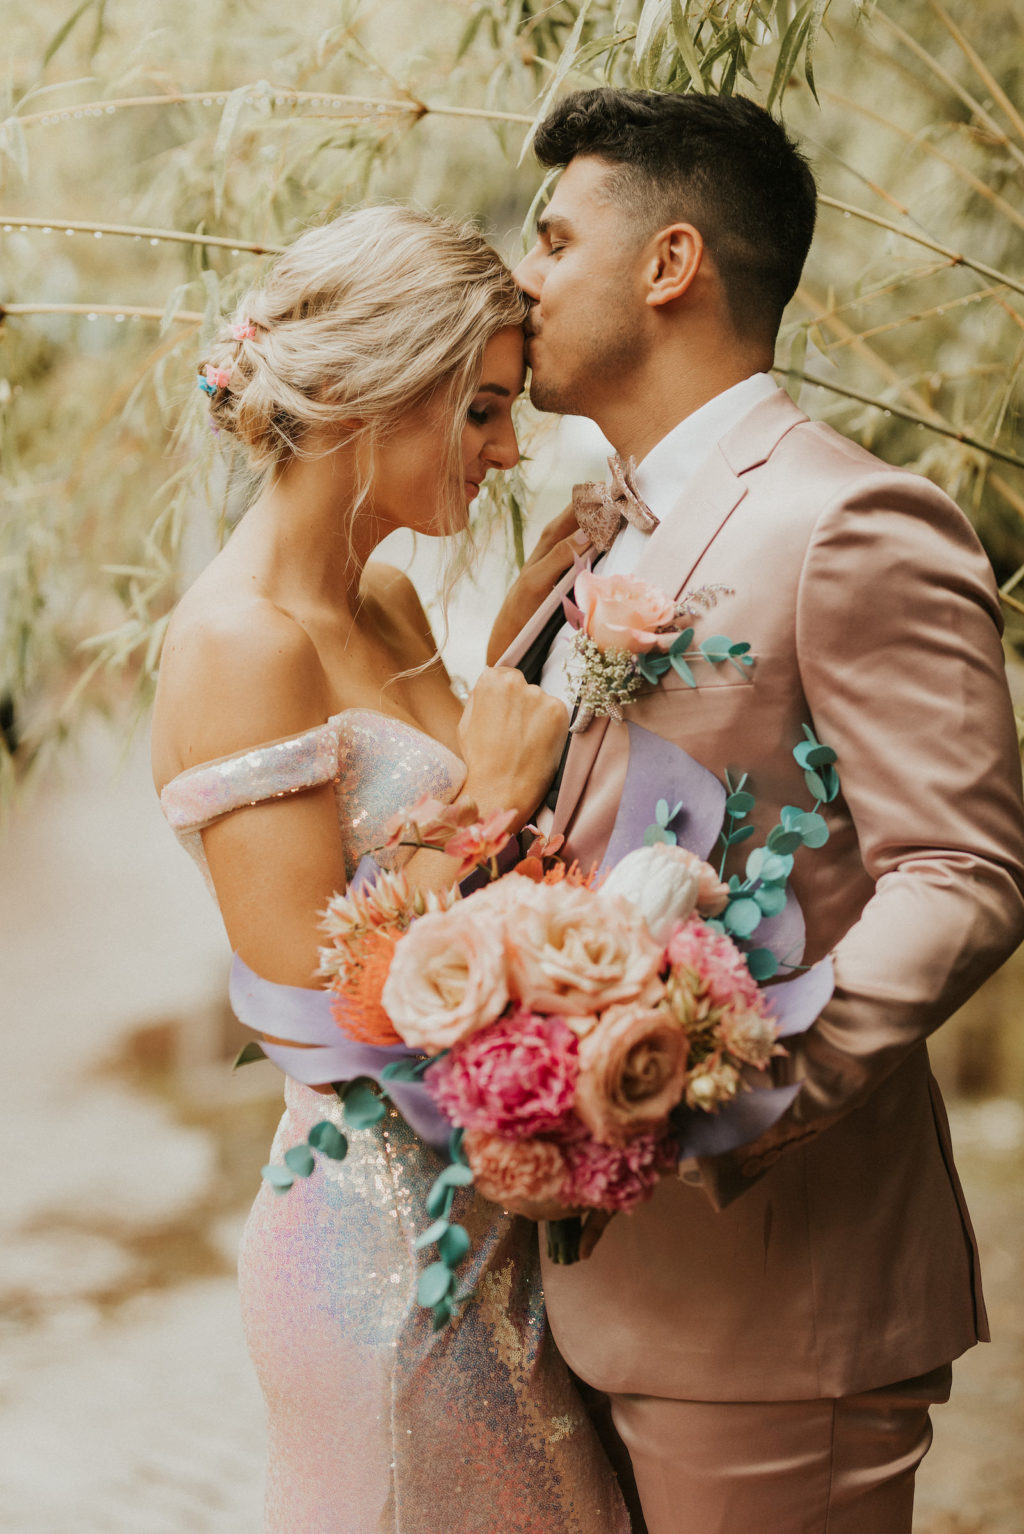 Iridescent Pastel 90's Wedding Inspiration | Pastel Rose and Orchid Bouquet with Painted Monstera and Eucalyptus Leaves | Bride and Groom Portrait with Blush Pink Suit and Shimmer Silver Wedding Dress